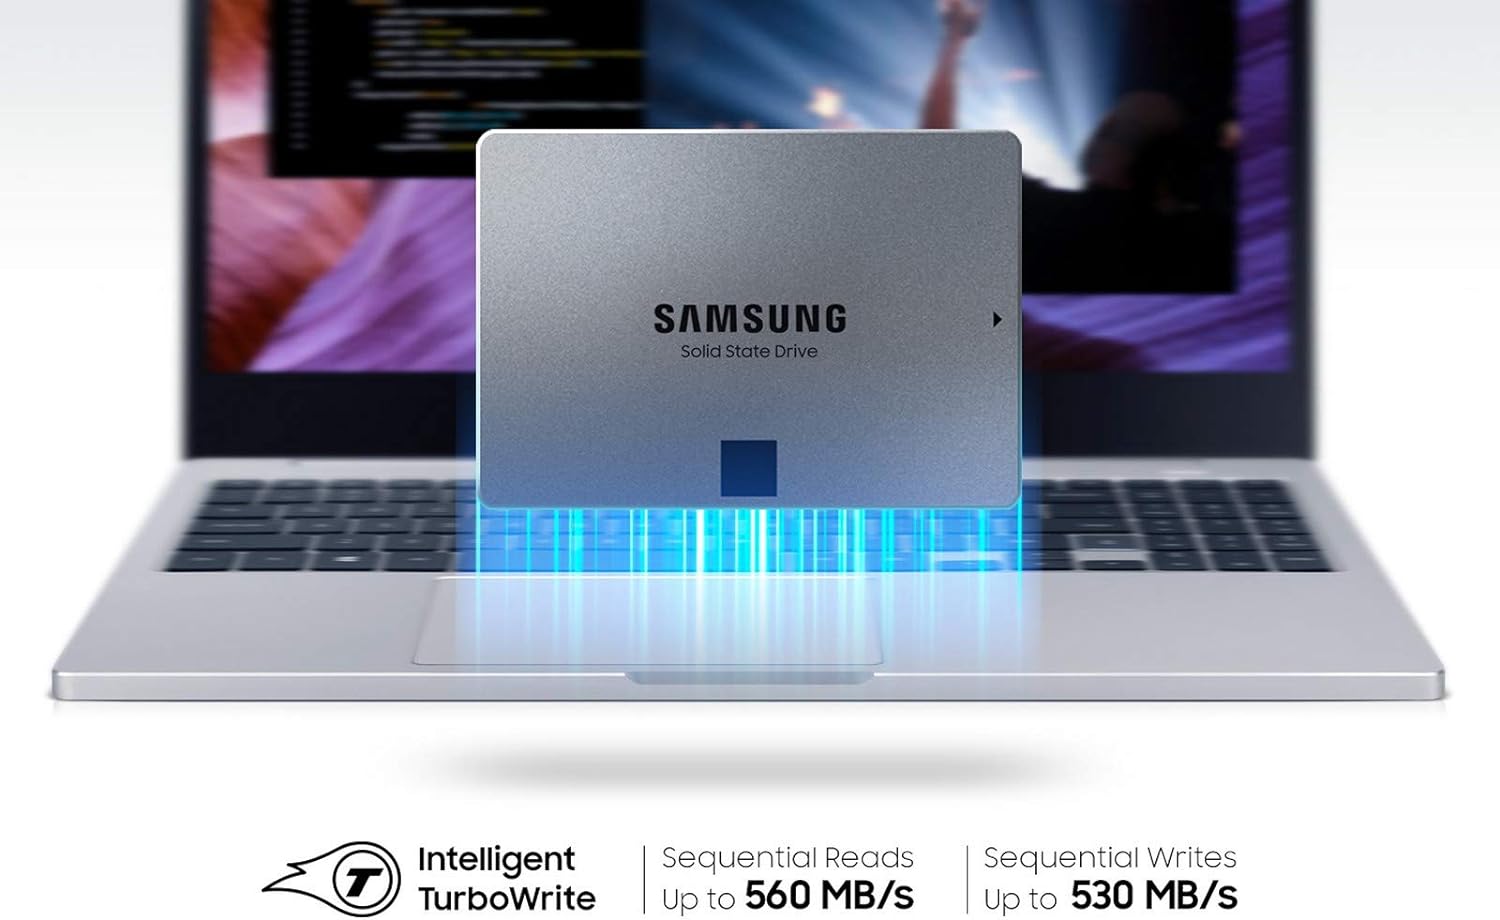 SAMSUNG 870 QVO SATA III SSD 2TB 2.5 Internal Solid State Drive, Upgrade Desktop PC or Laptop Memory and Storage for IT Pros, Creators, Everyday Users, MZ-77Q2T0B